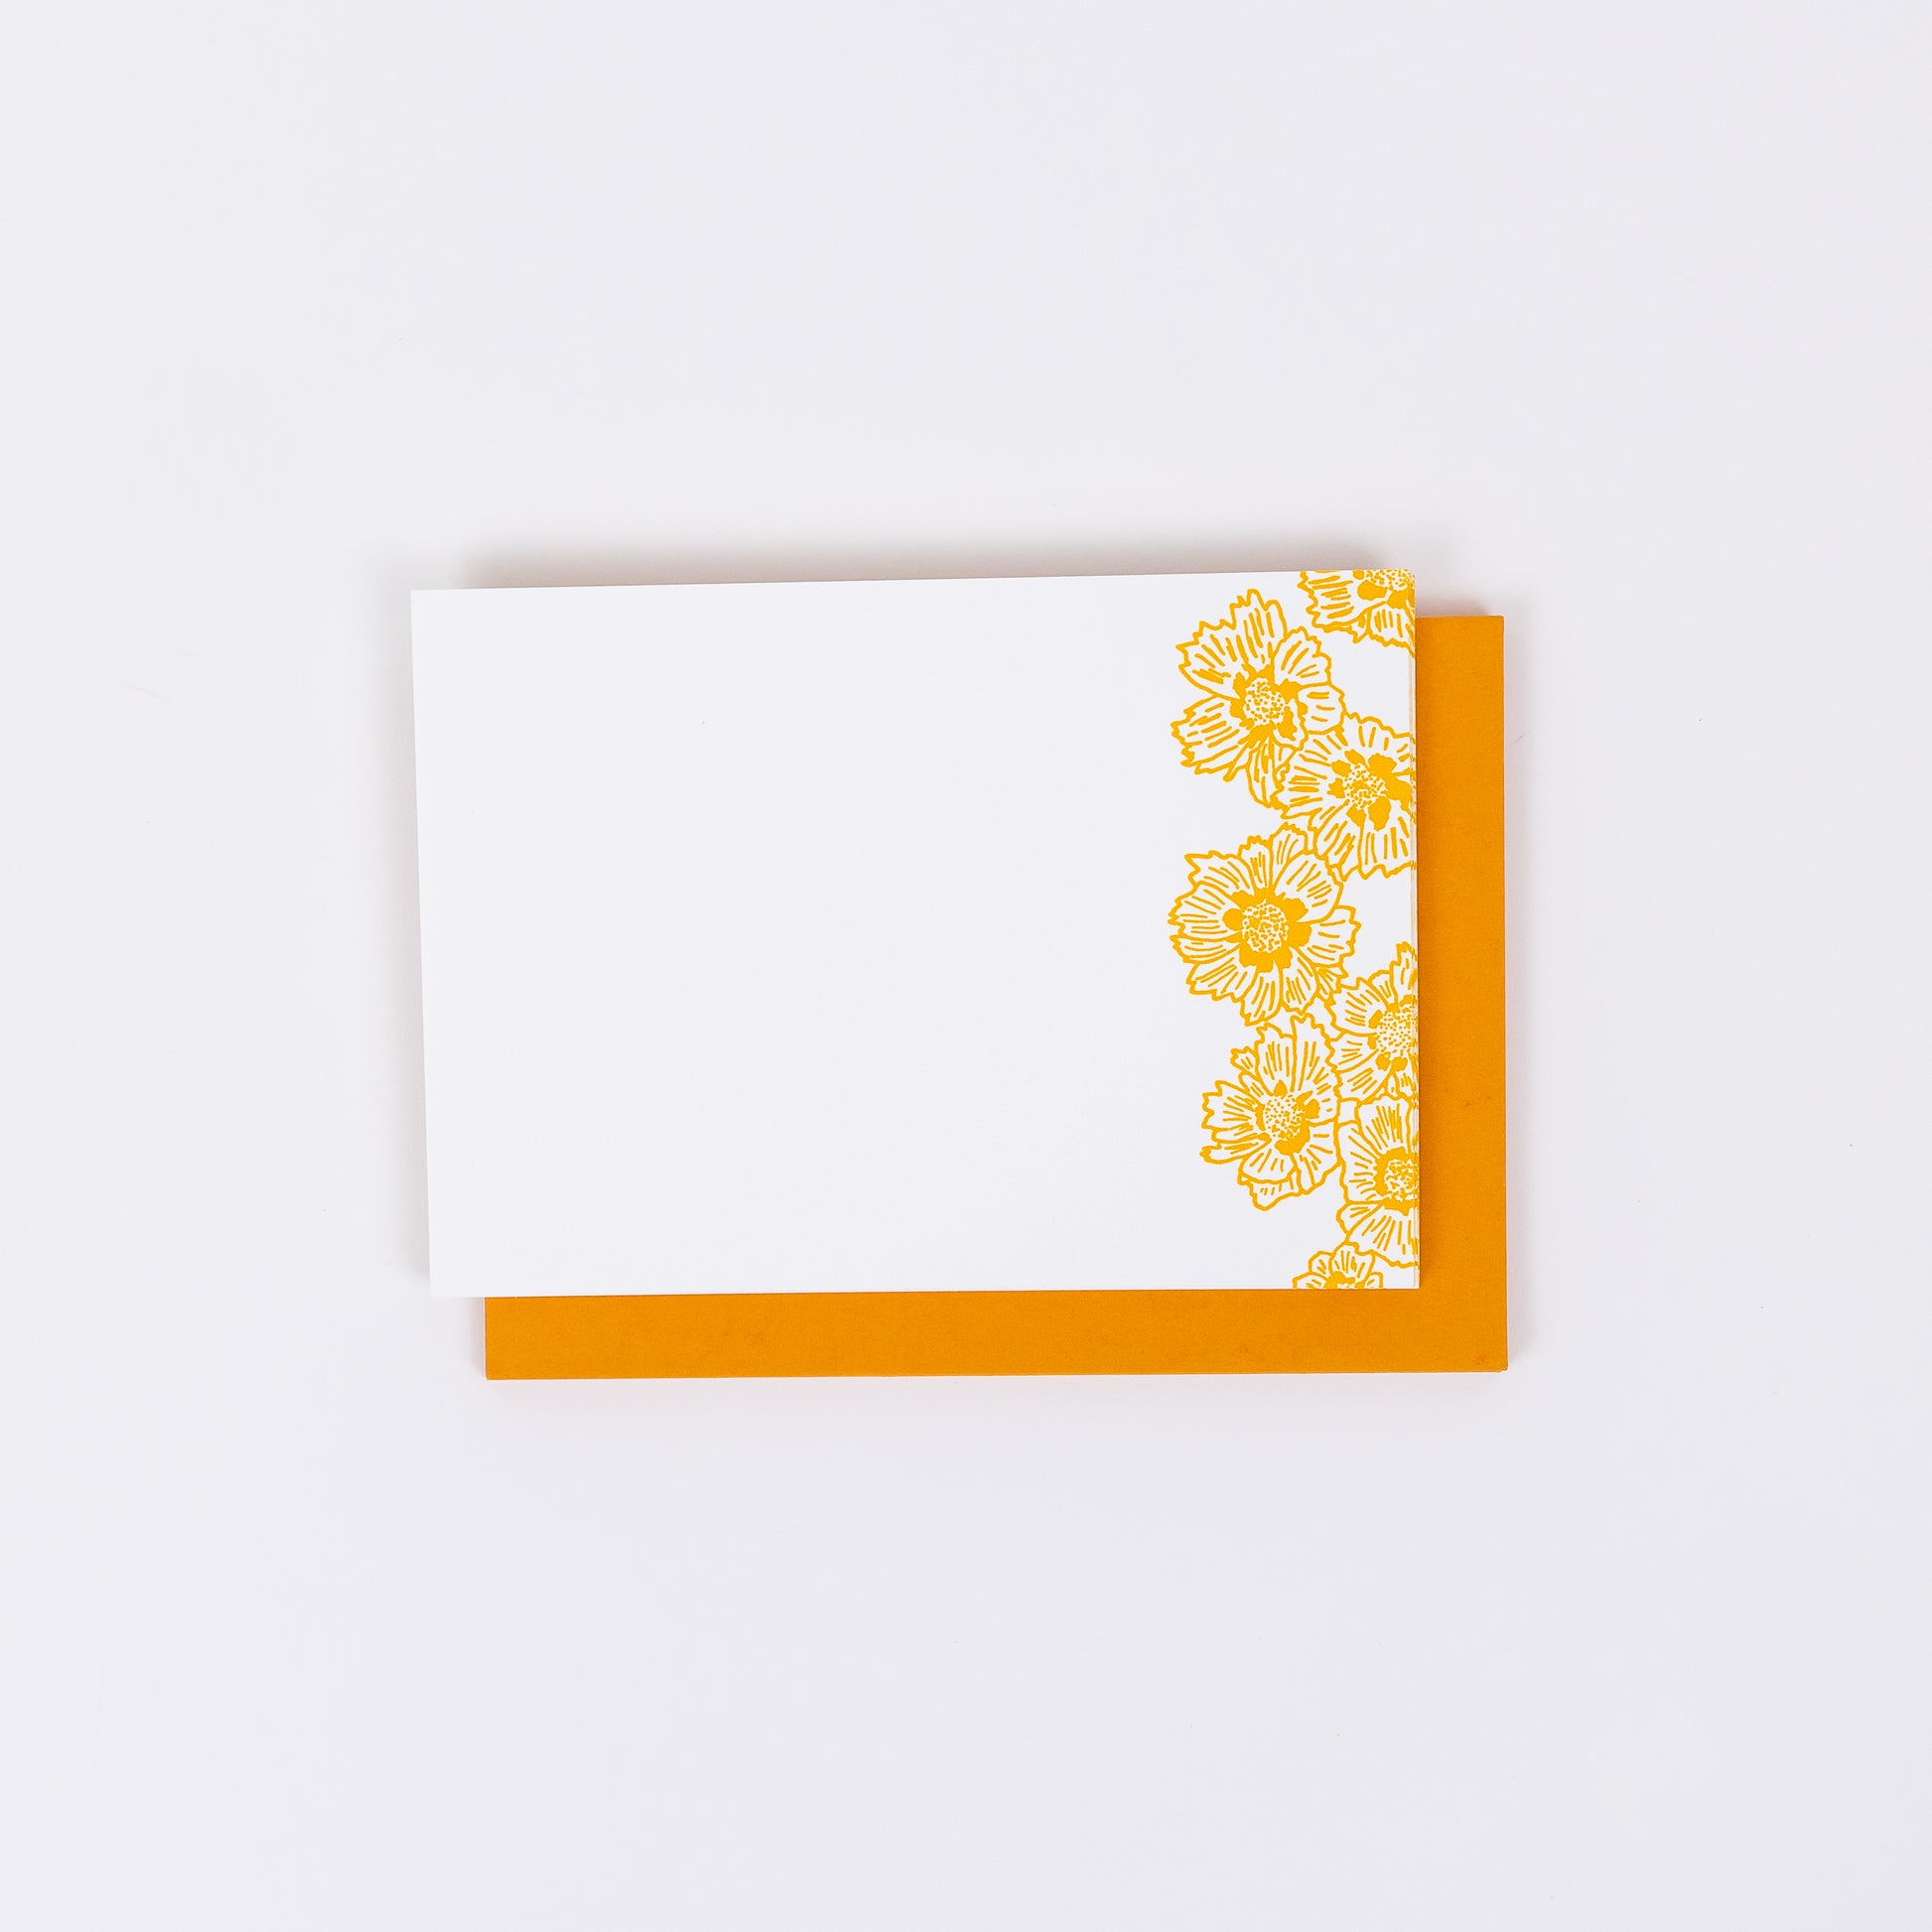 Set of 10 Letterpress Note Cards featuring hand-drawn Coreopsis Flowers letterpress printed in a vibrant golden orange ink onto 100% cotton paper. Includes 10 bright orange envelopes. Size A6.  The cards are stacked on the envelopes shown on a white background.